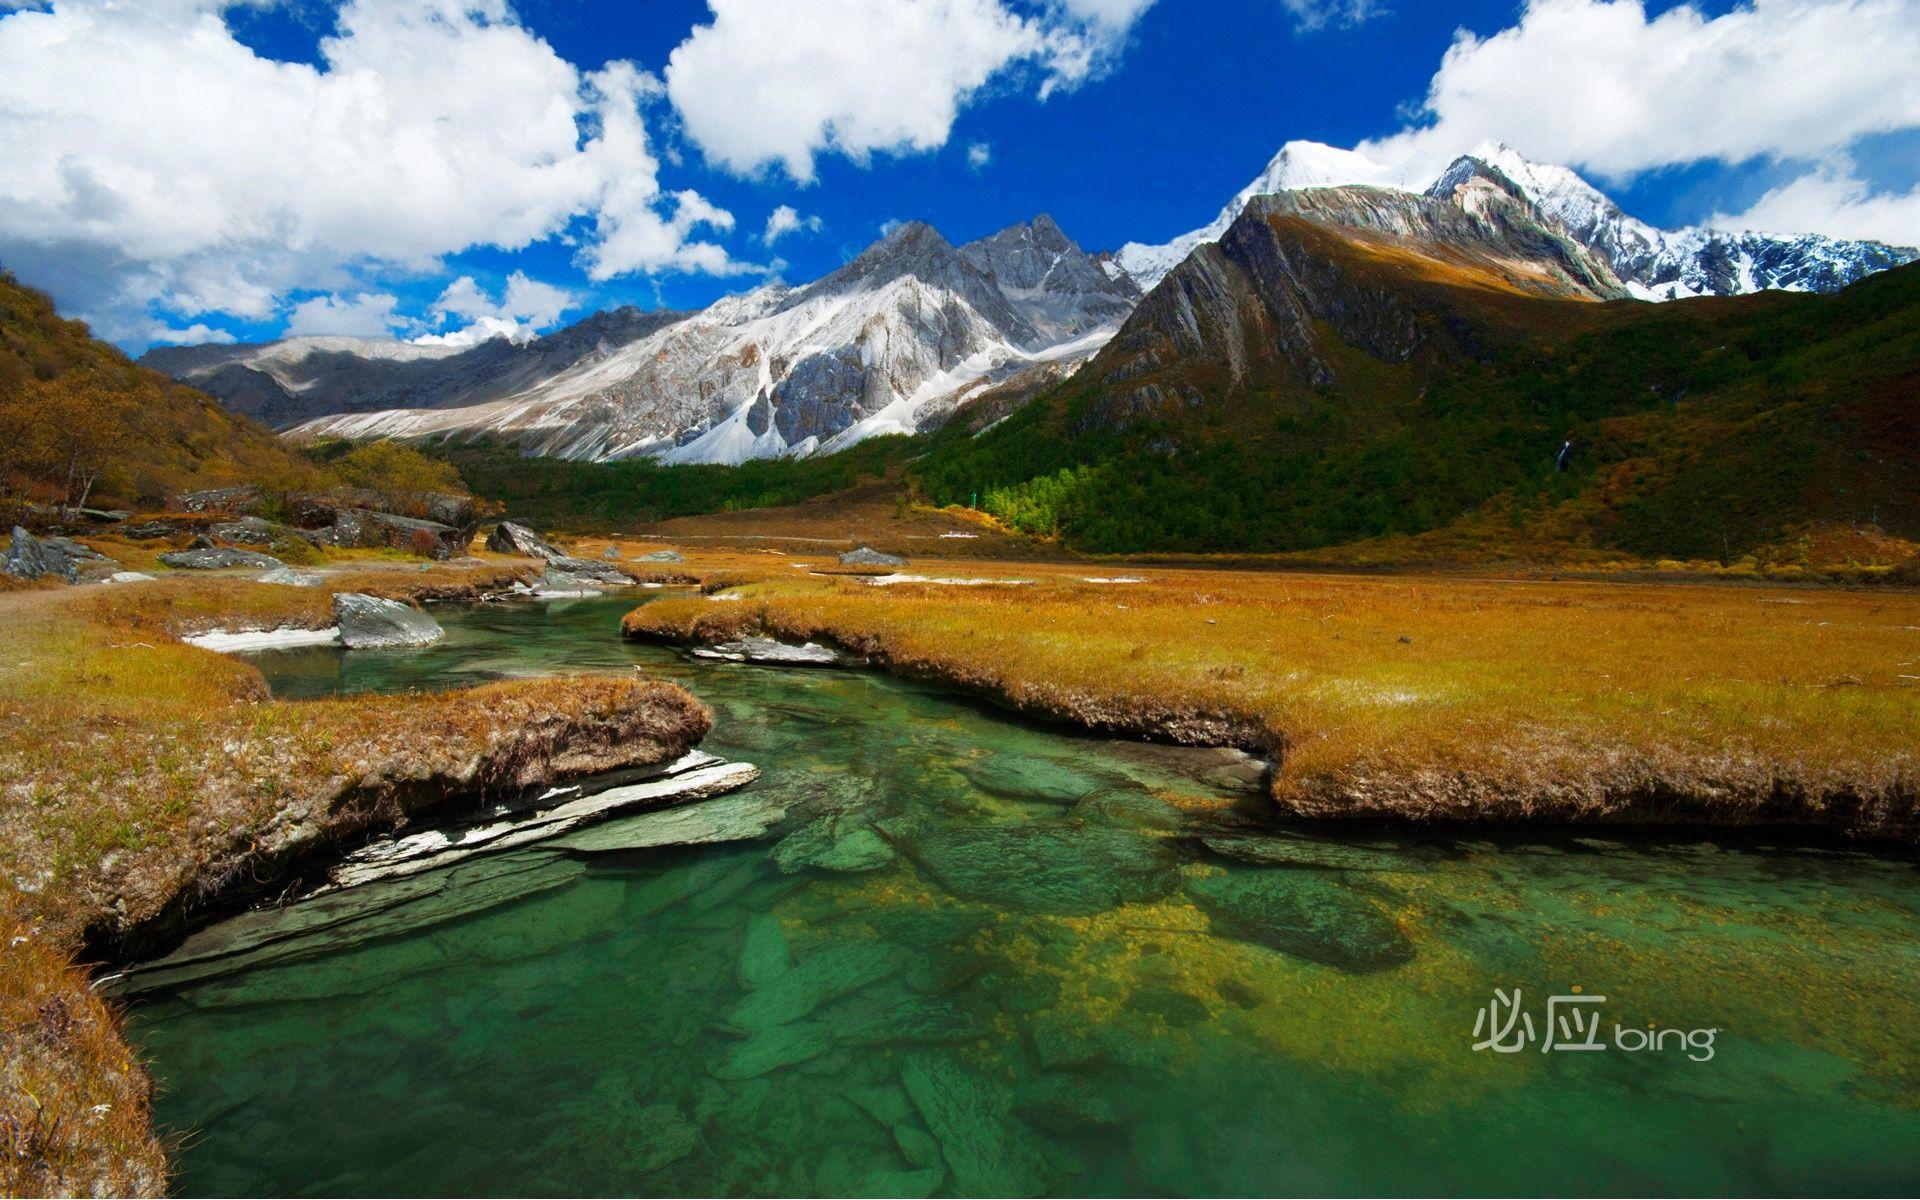 Scenery in Southwest China Wallpaper in jpg format for free download